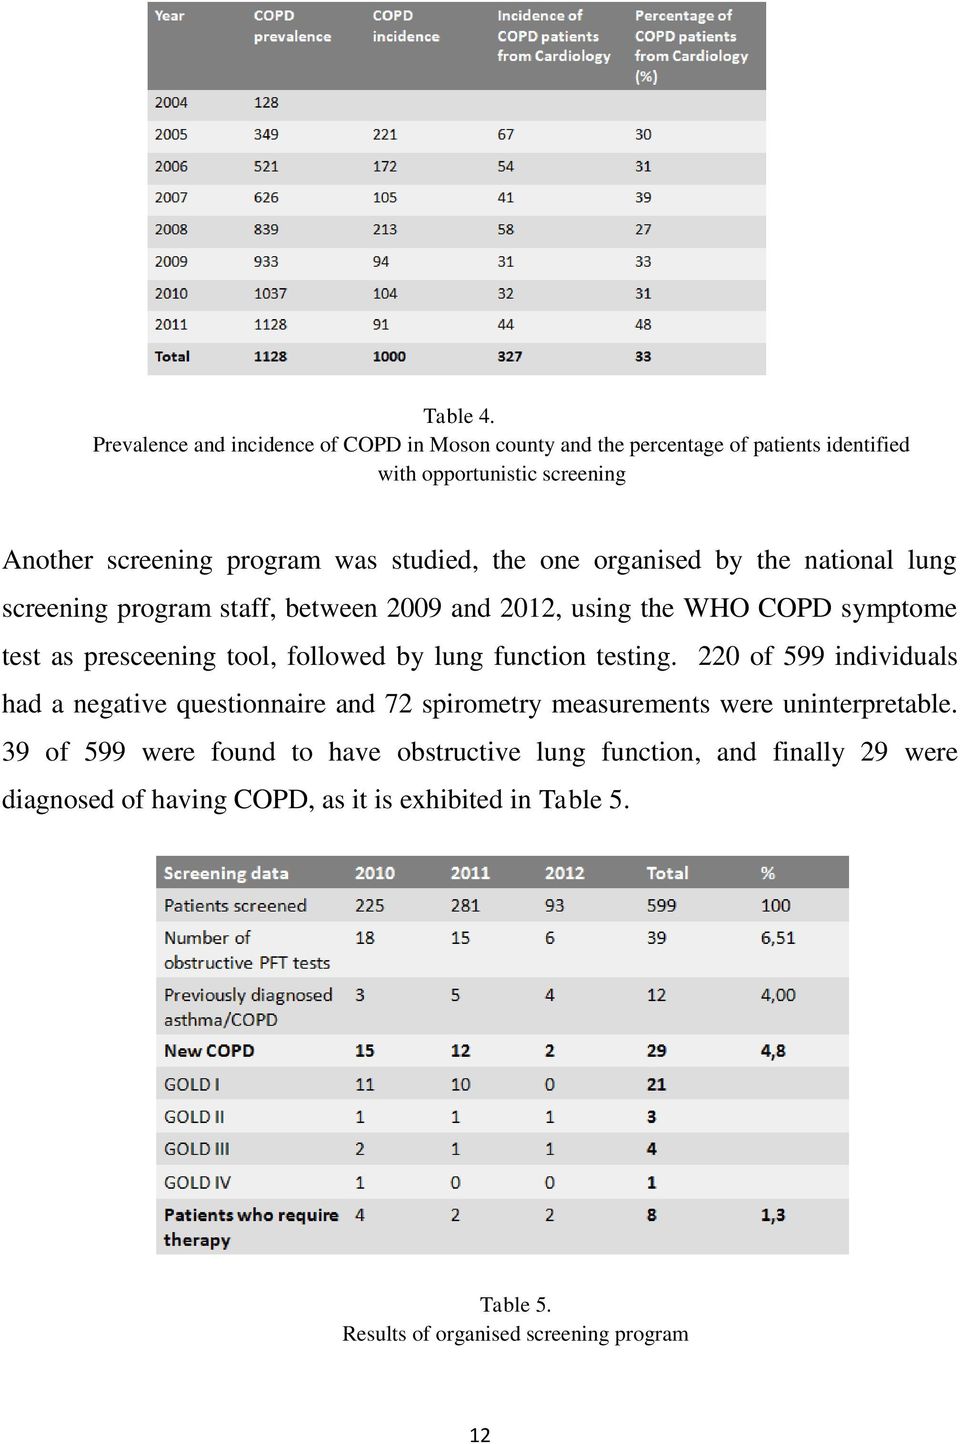 studied, the one organised by the national lung screening program staff, between 2009 and 2012, using the WHO COPD symptome test as presceening tool,